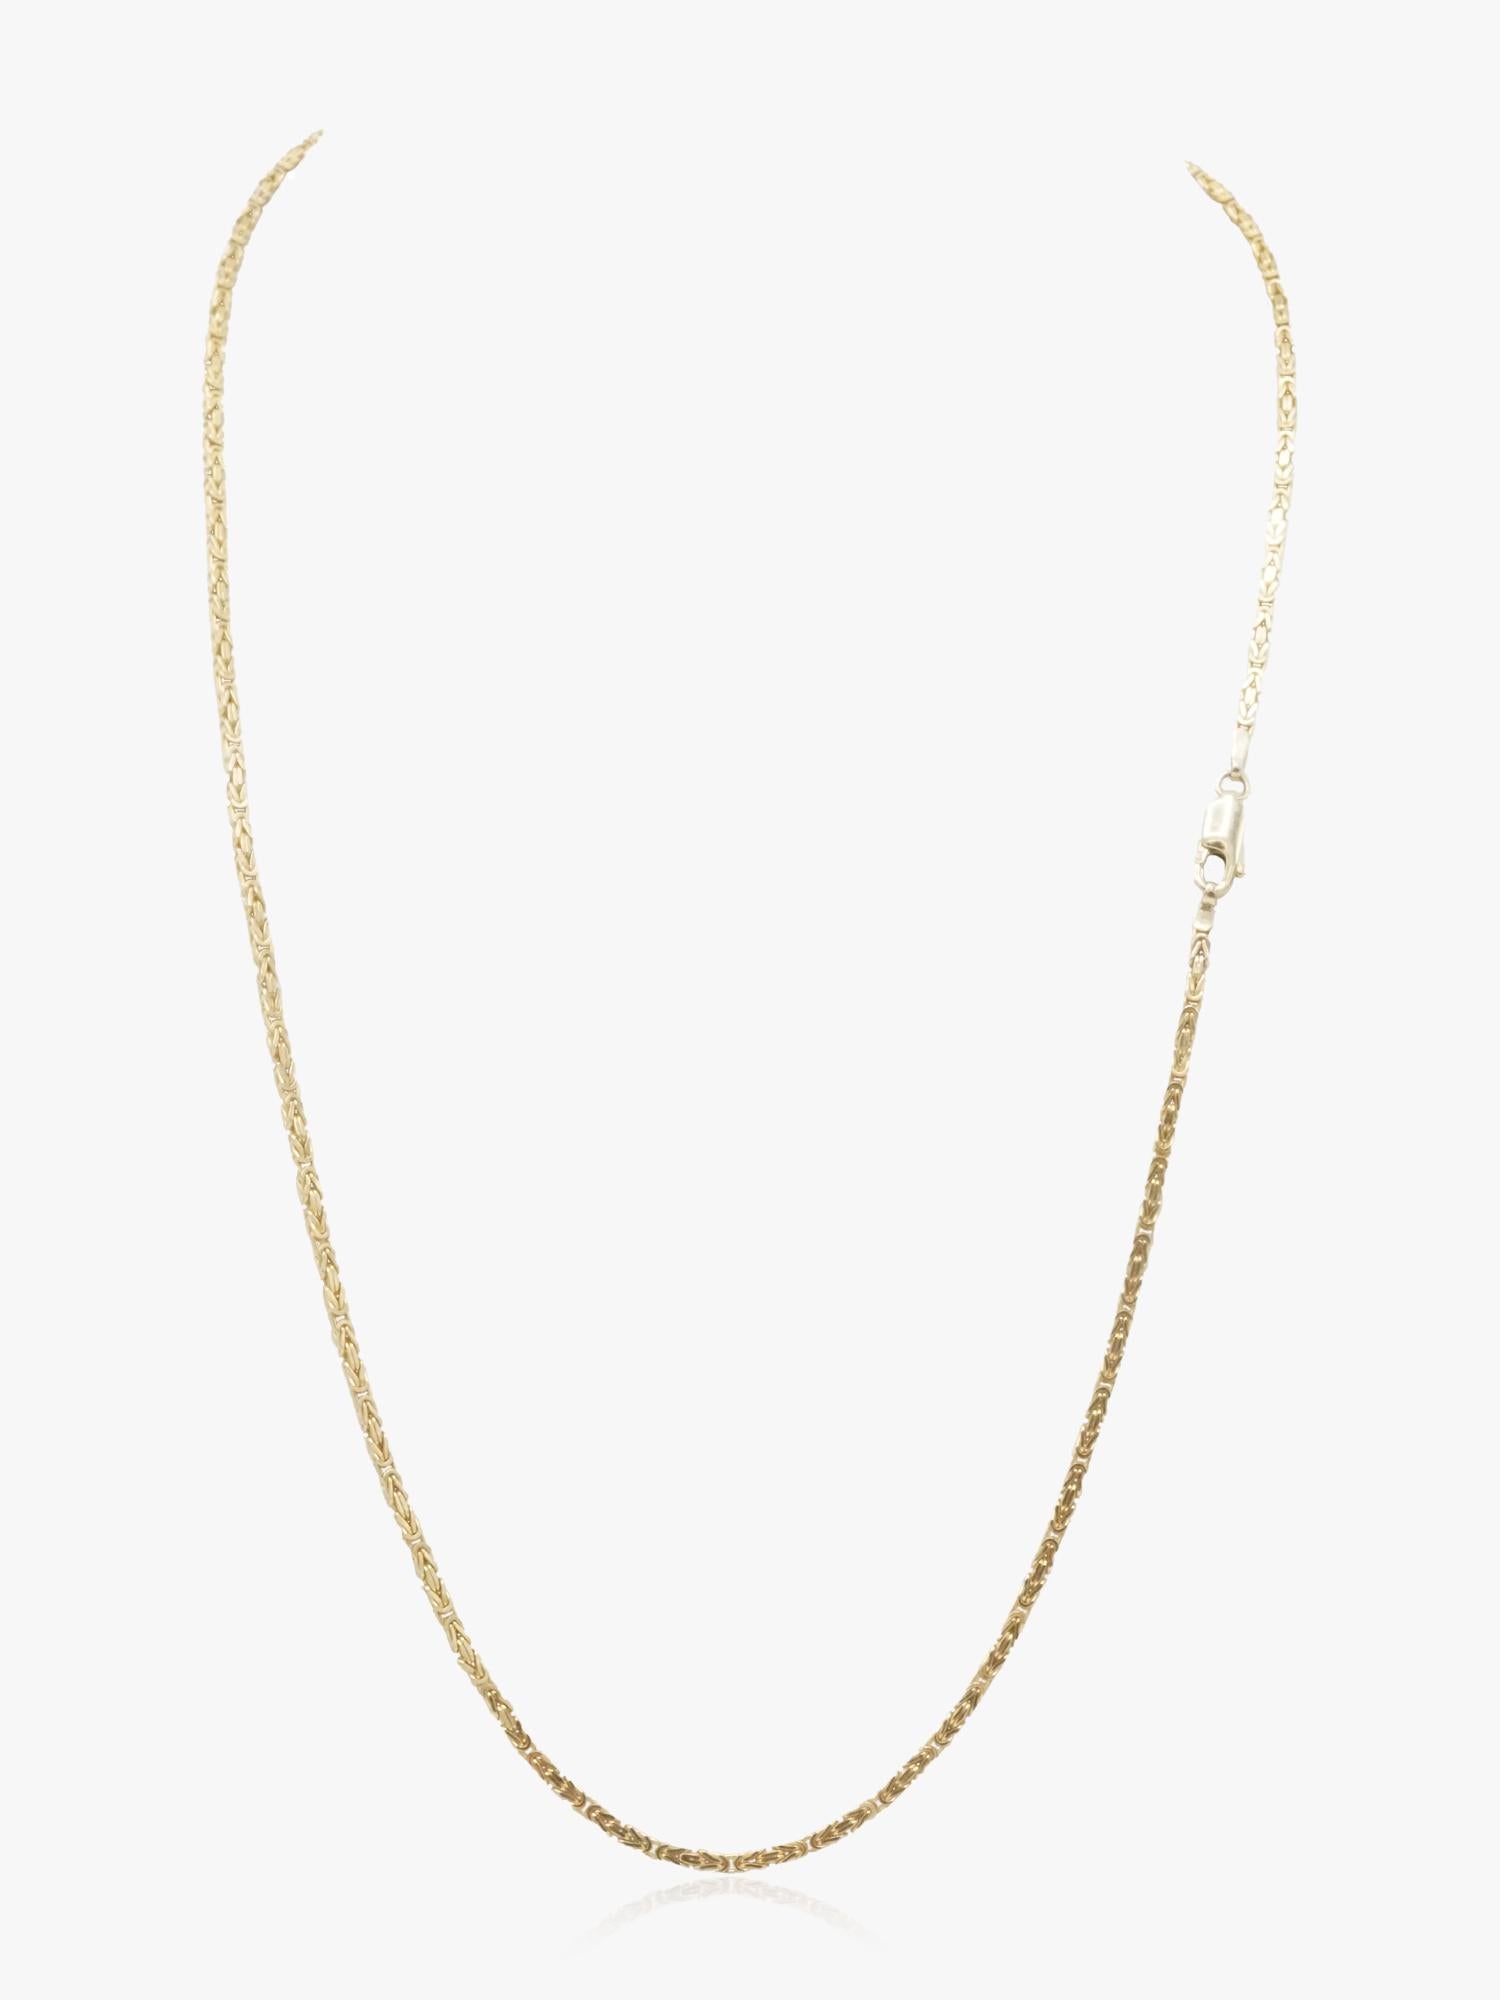 Vintage Byzantine style chain in 14k gold weighing 13.5 grams and measuring 22 inches. With a rare square profile, this solid chain has a textured pattern achieved through meticulous interlocking links, providing a unique twist on the classic